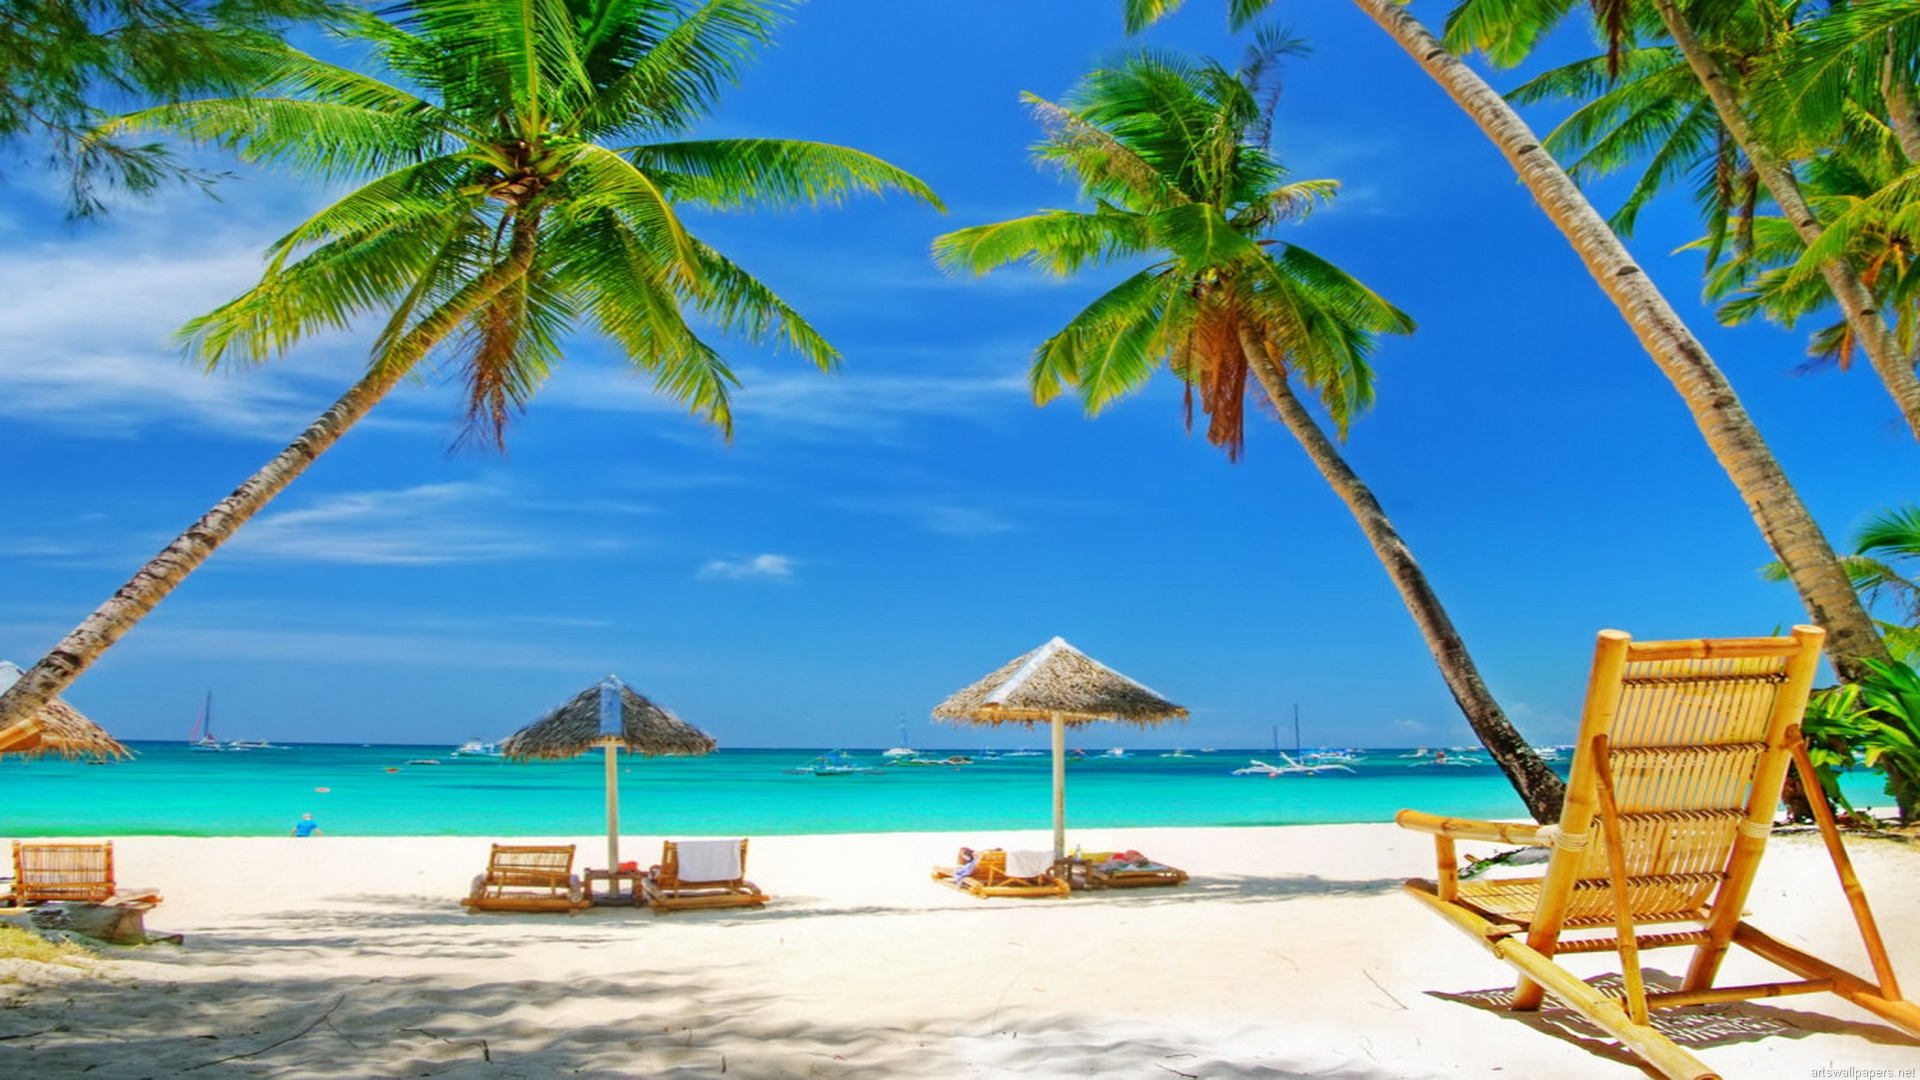 Sunny Beach Wallpaper Pictures In High Definition Or